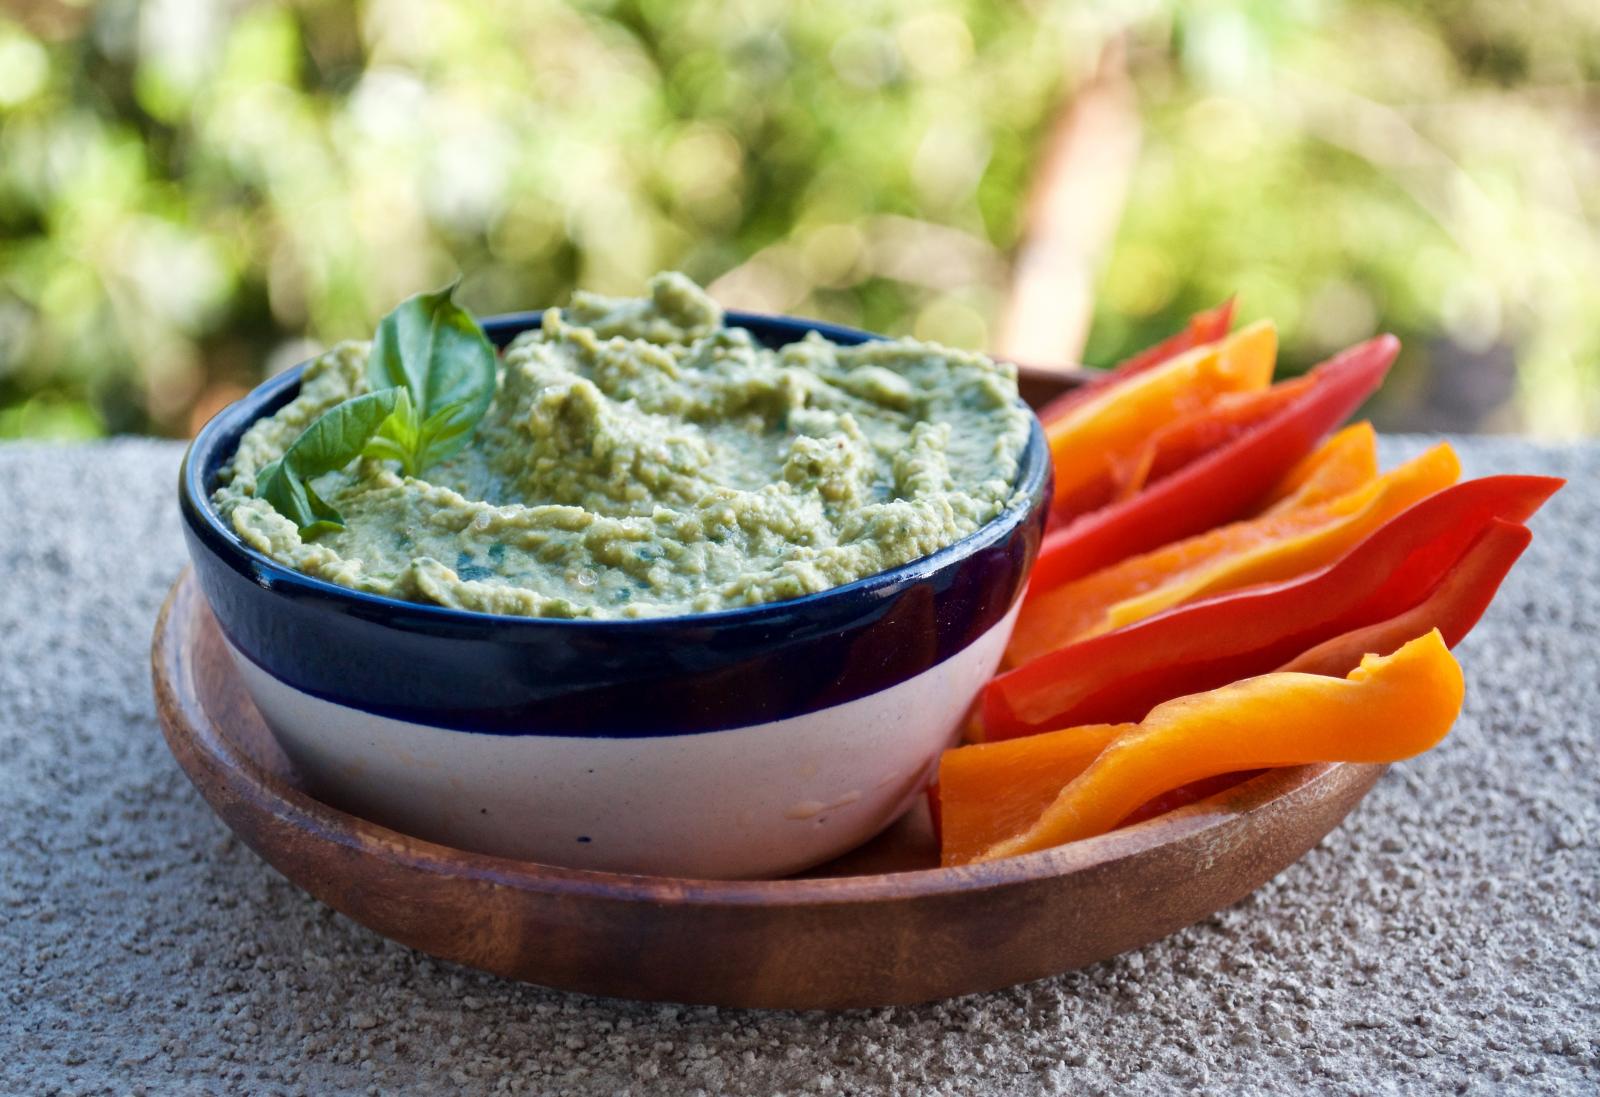 Pesto Hummus (Or the Dip/Dressing I’ve Been Putting on EVERYTHING)